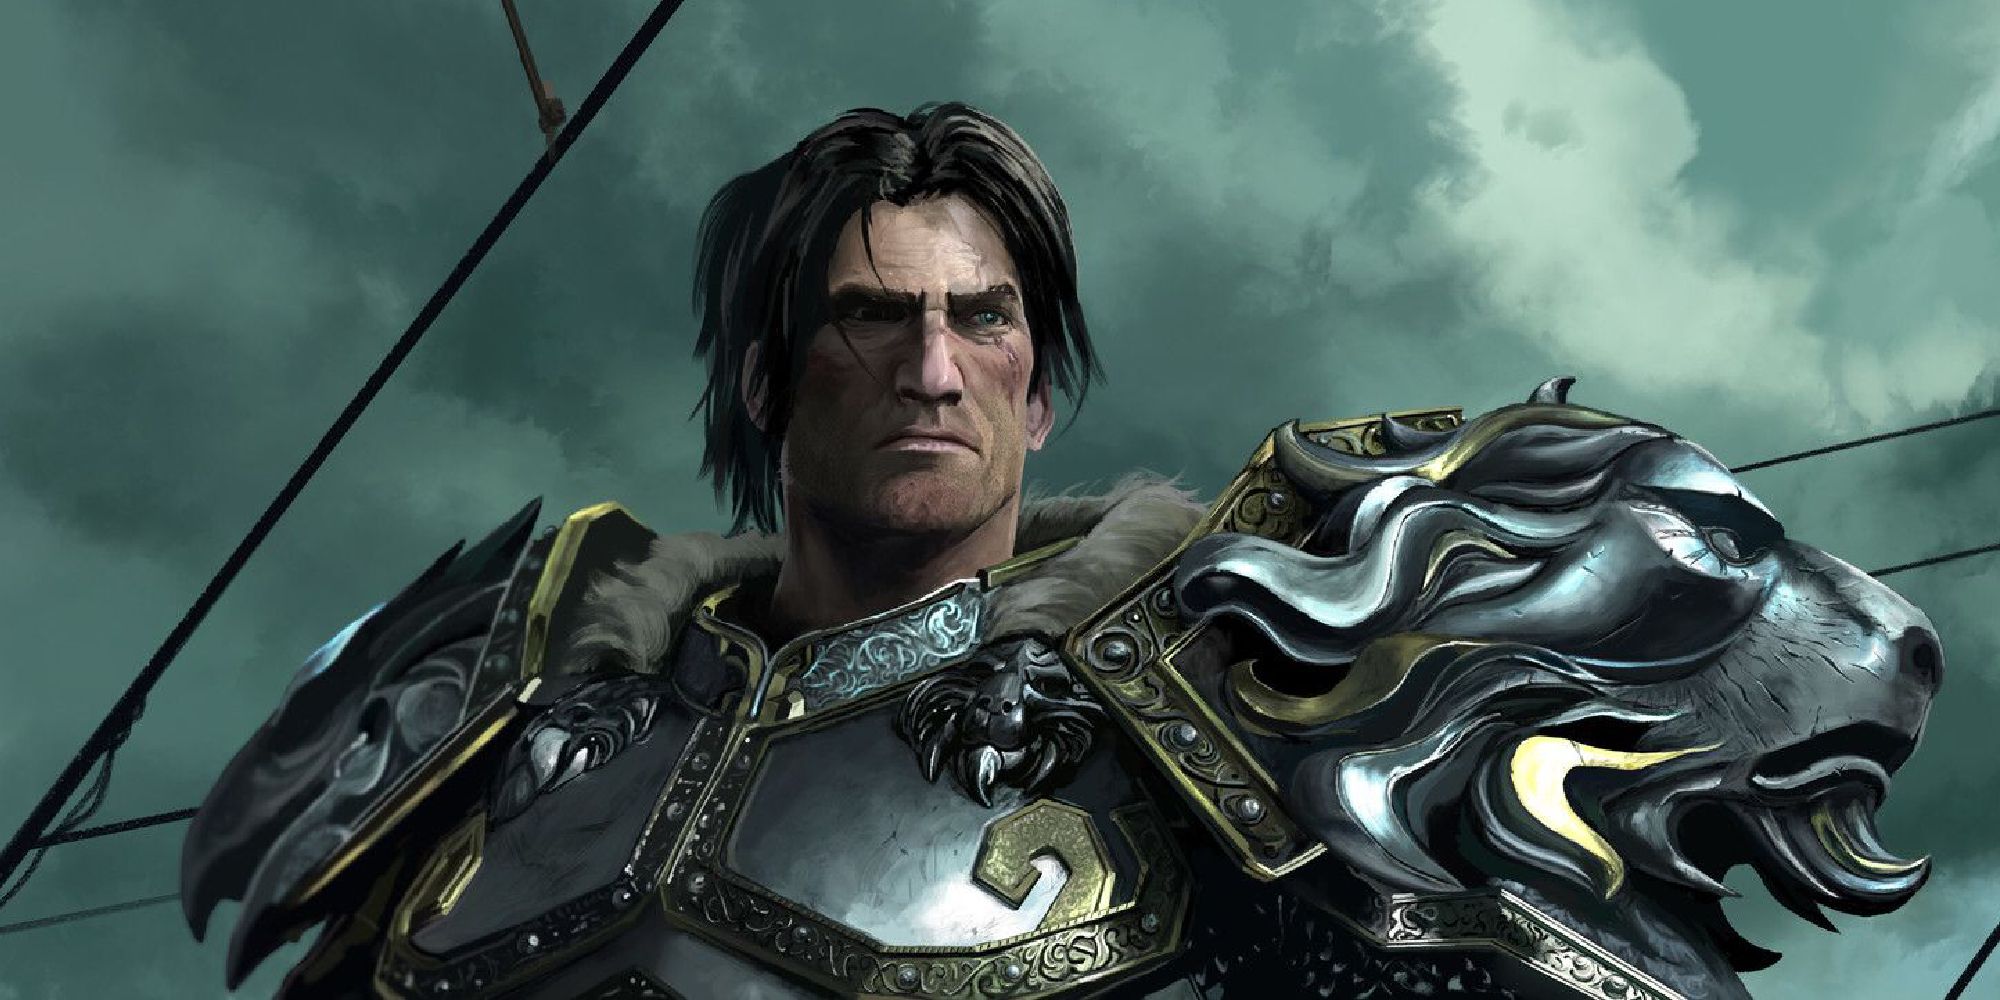 Varian Wrynn from wow against a storm